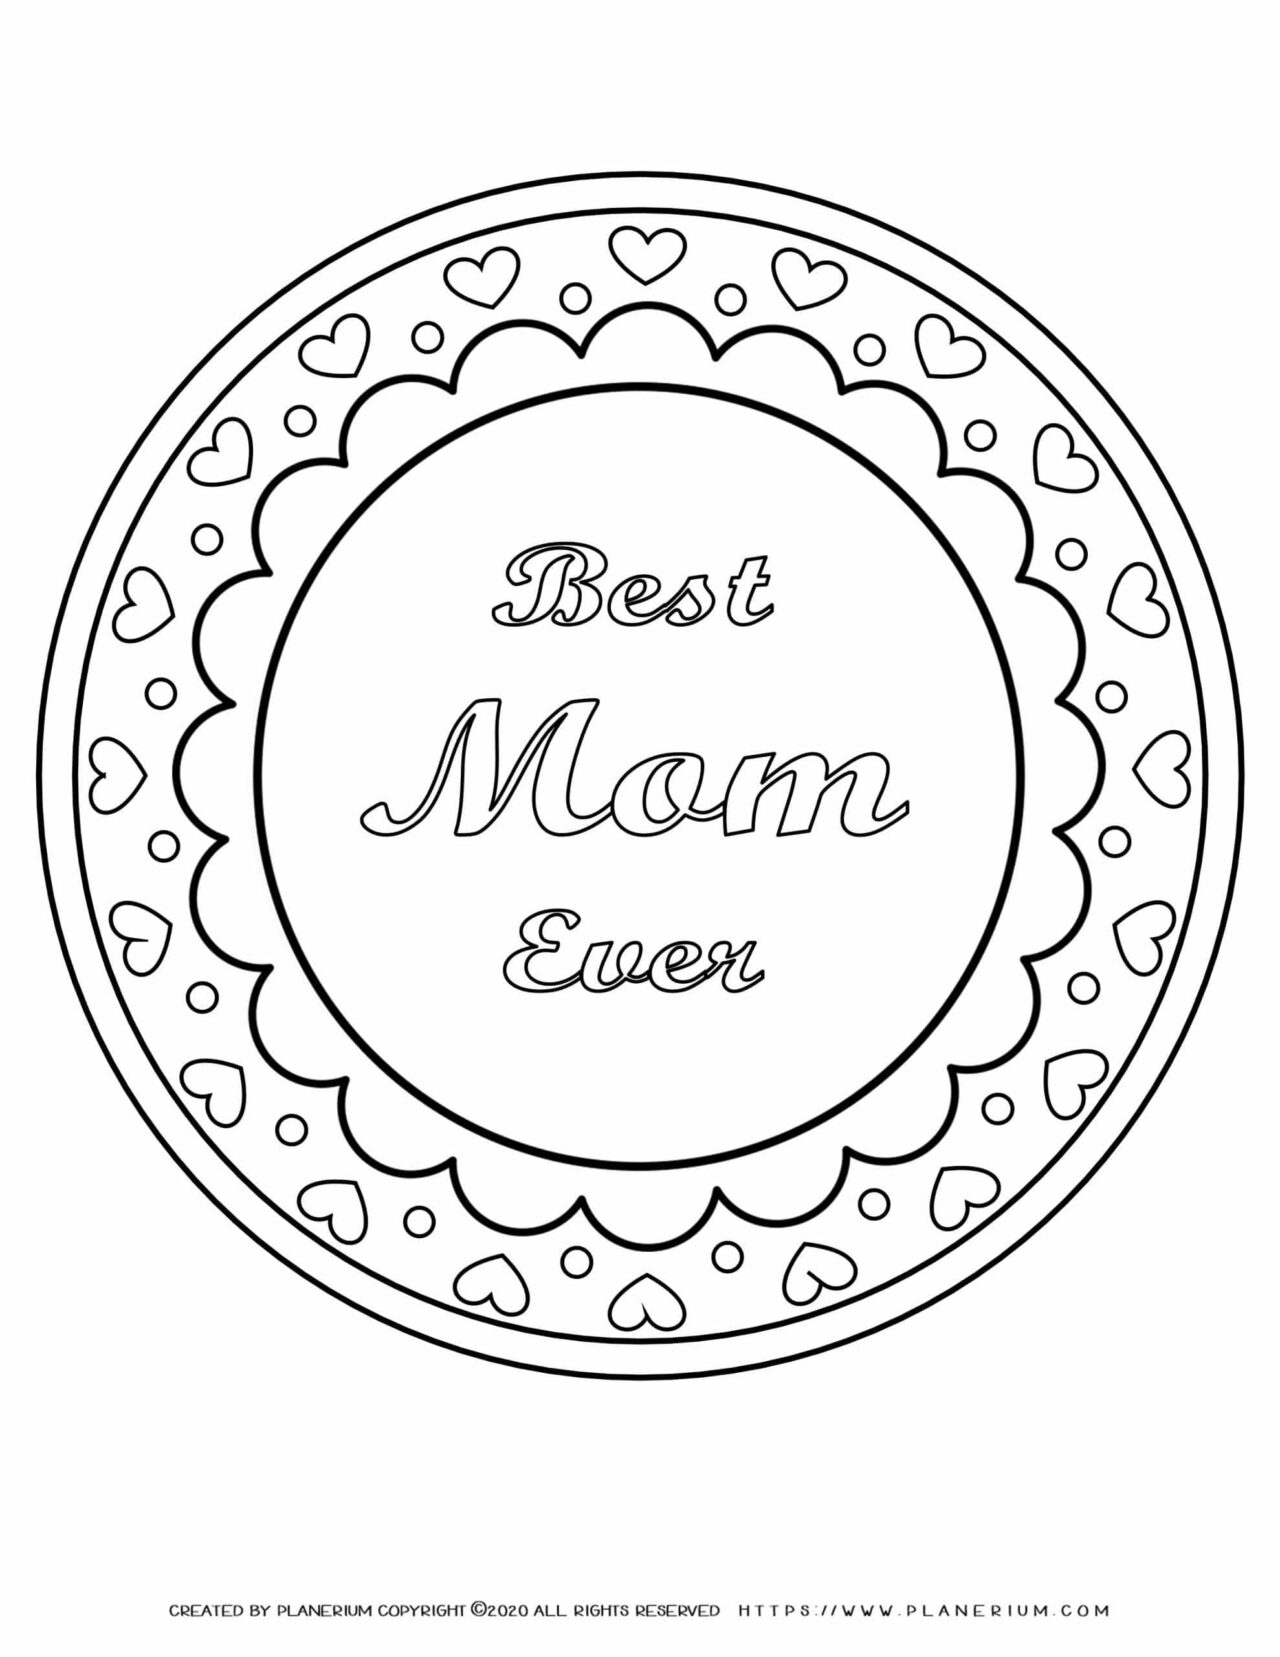 Mother's Day Coloring Page - Best Mom Ever